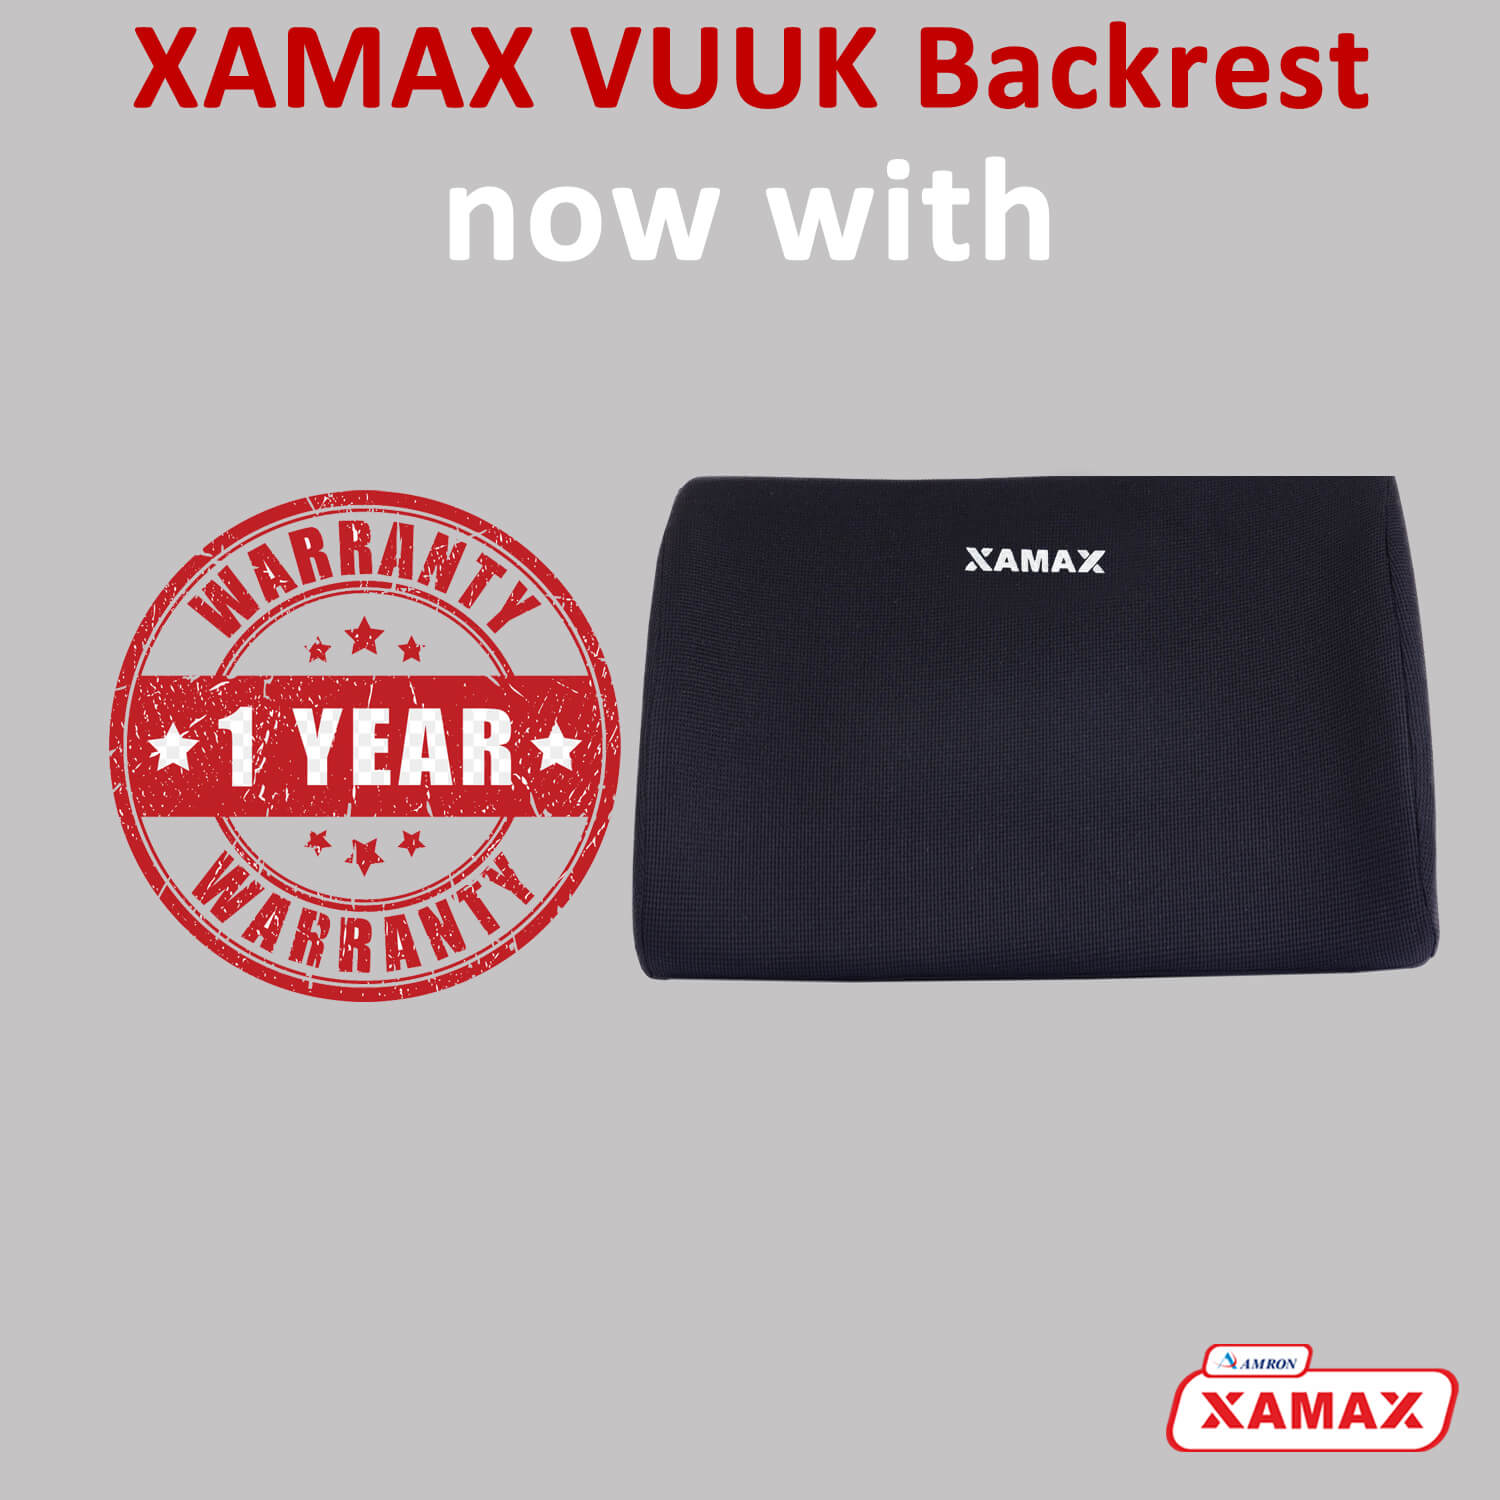 Xamax VUUK Backrest, For While You Reading, Watching TV On Bed, Sofa & Couch (Black)